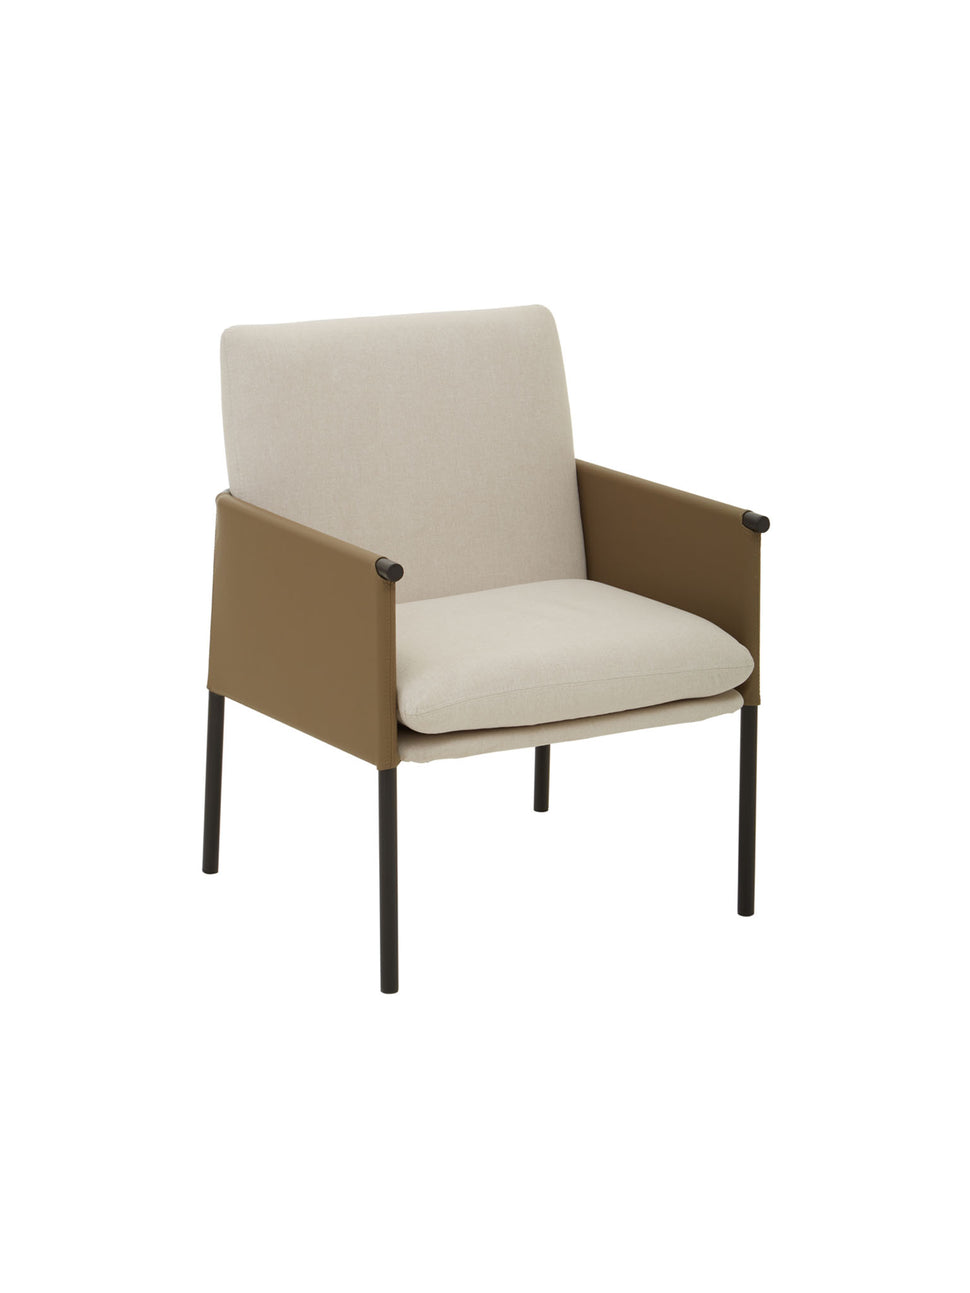 cream fabric and leather chair with black legs